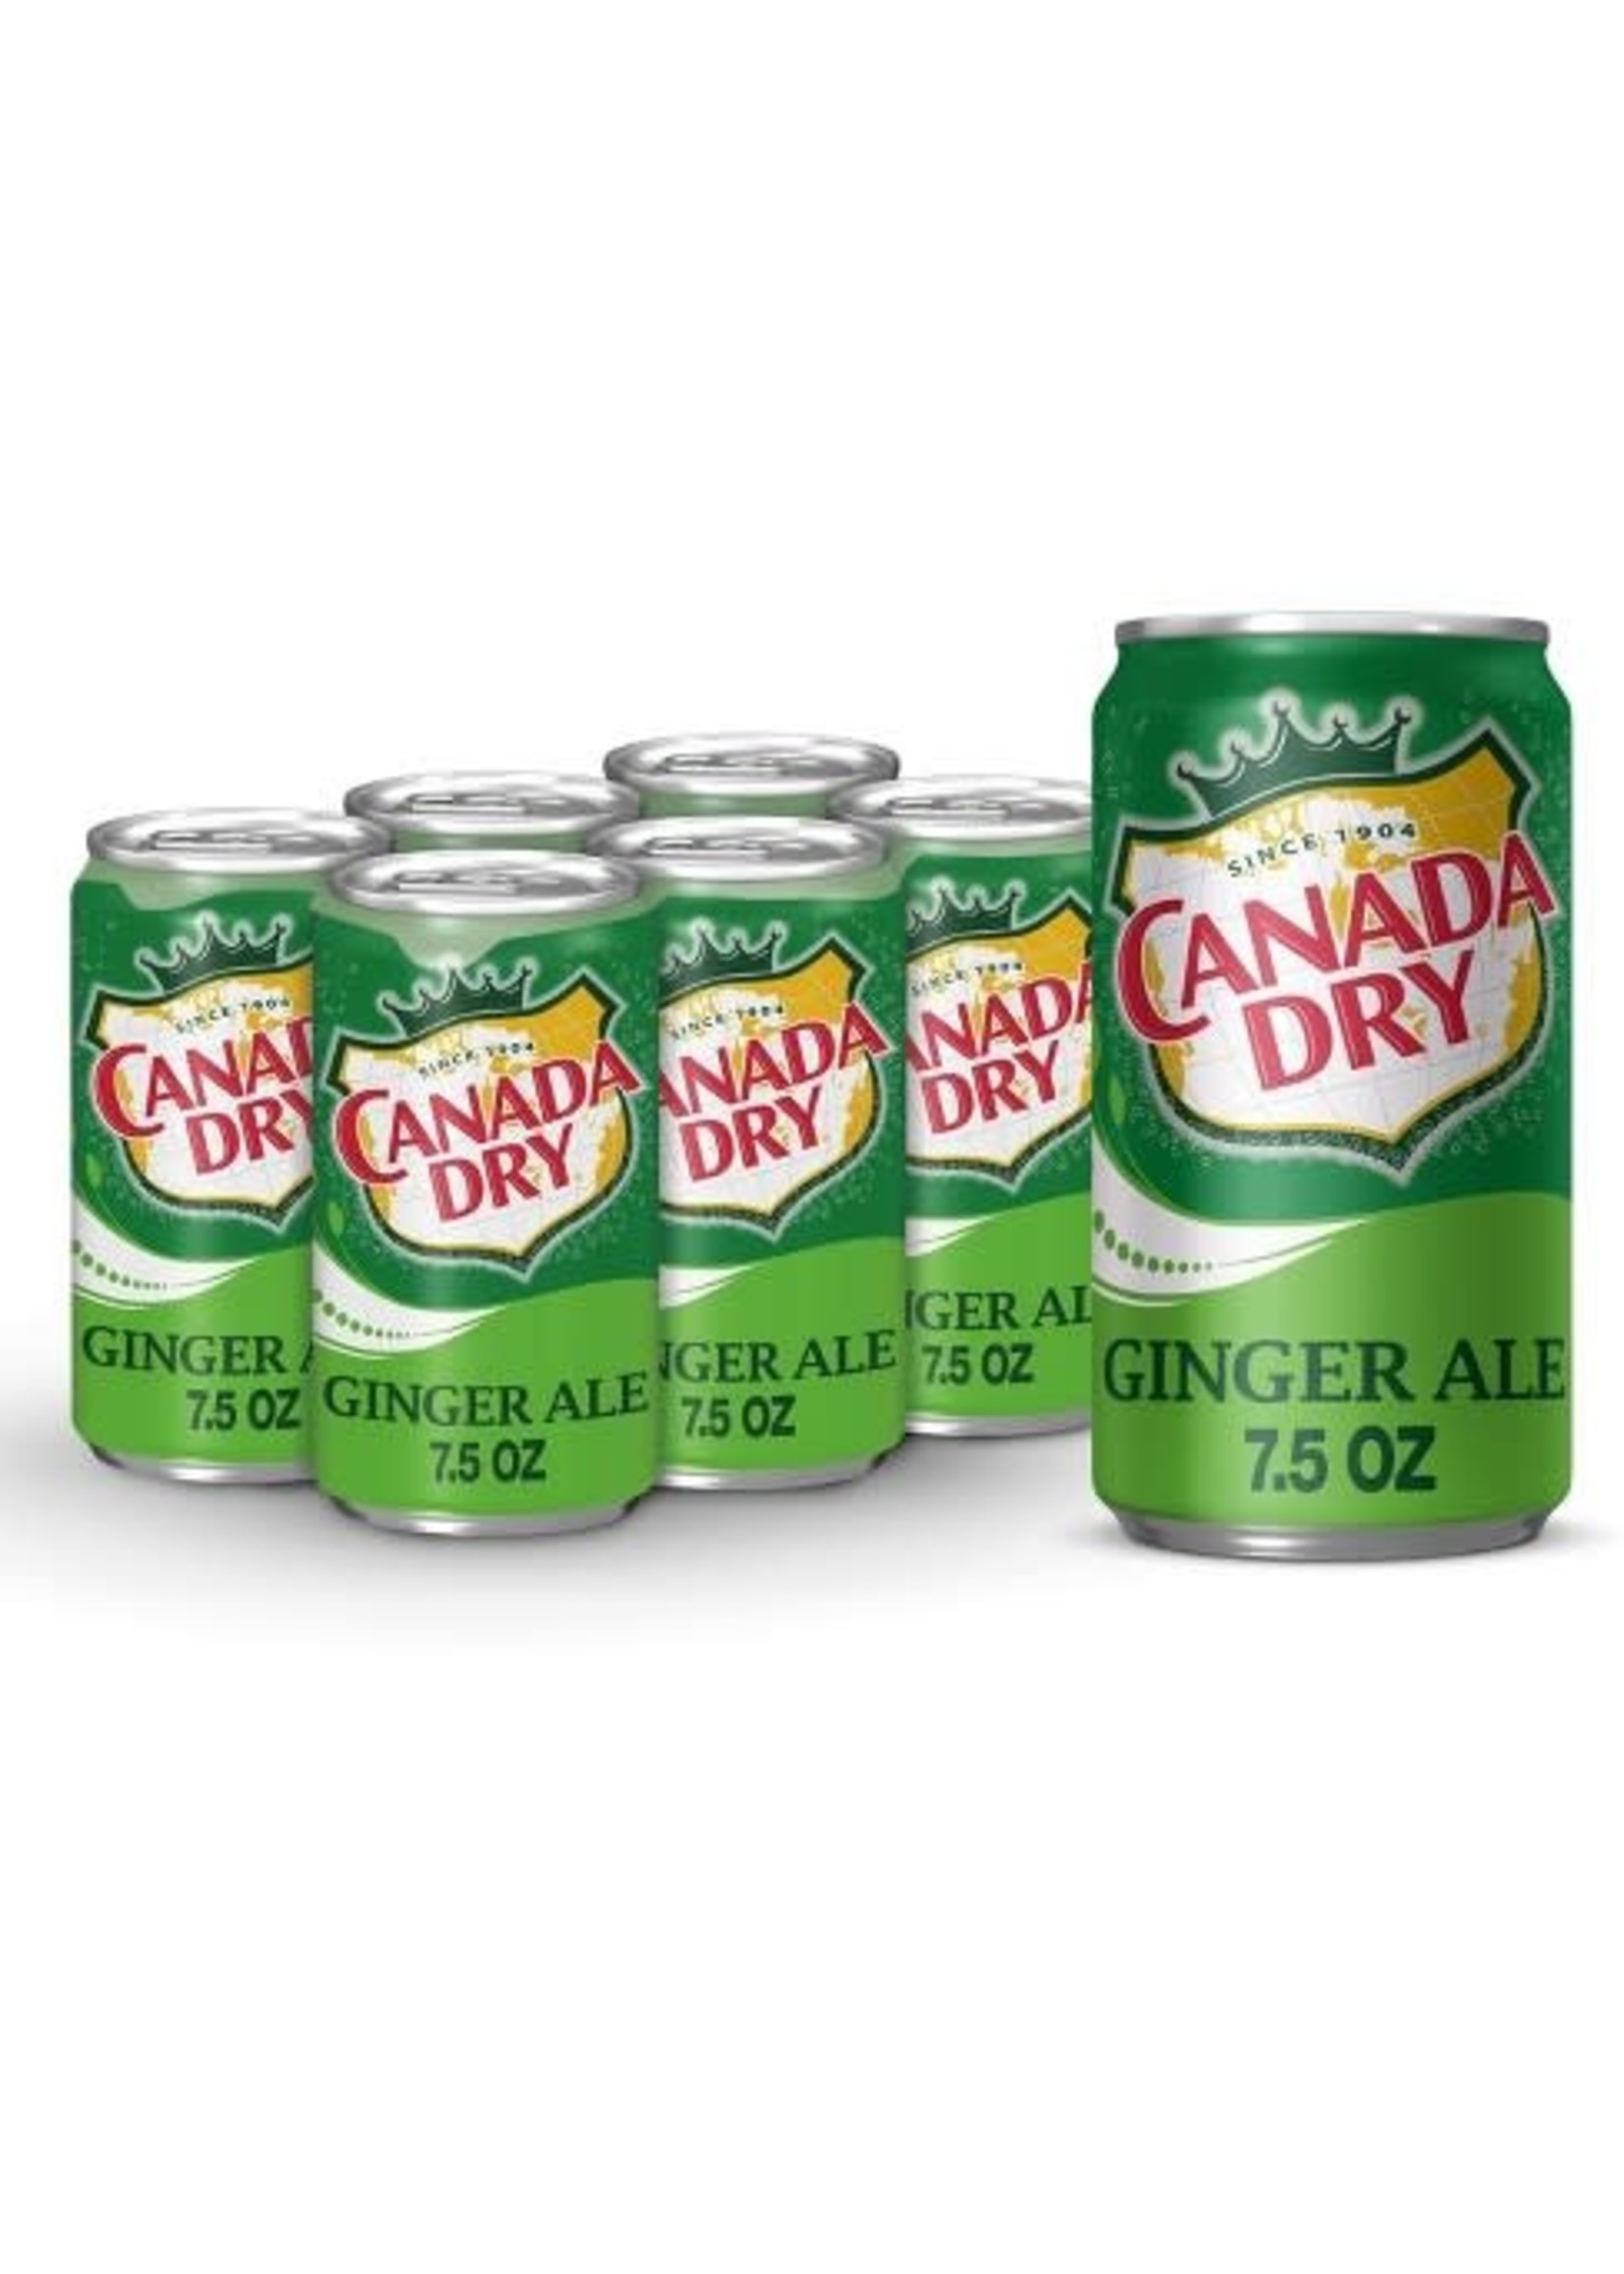 CANADA DRY GINGER ALE  6PK 7.5OZ CANS